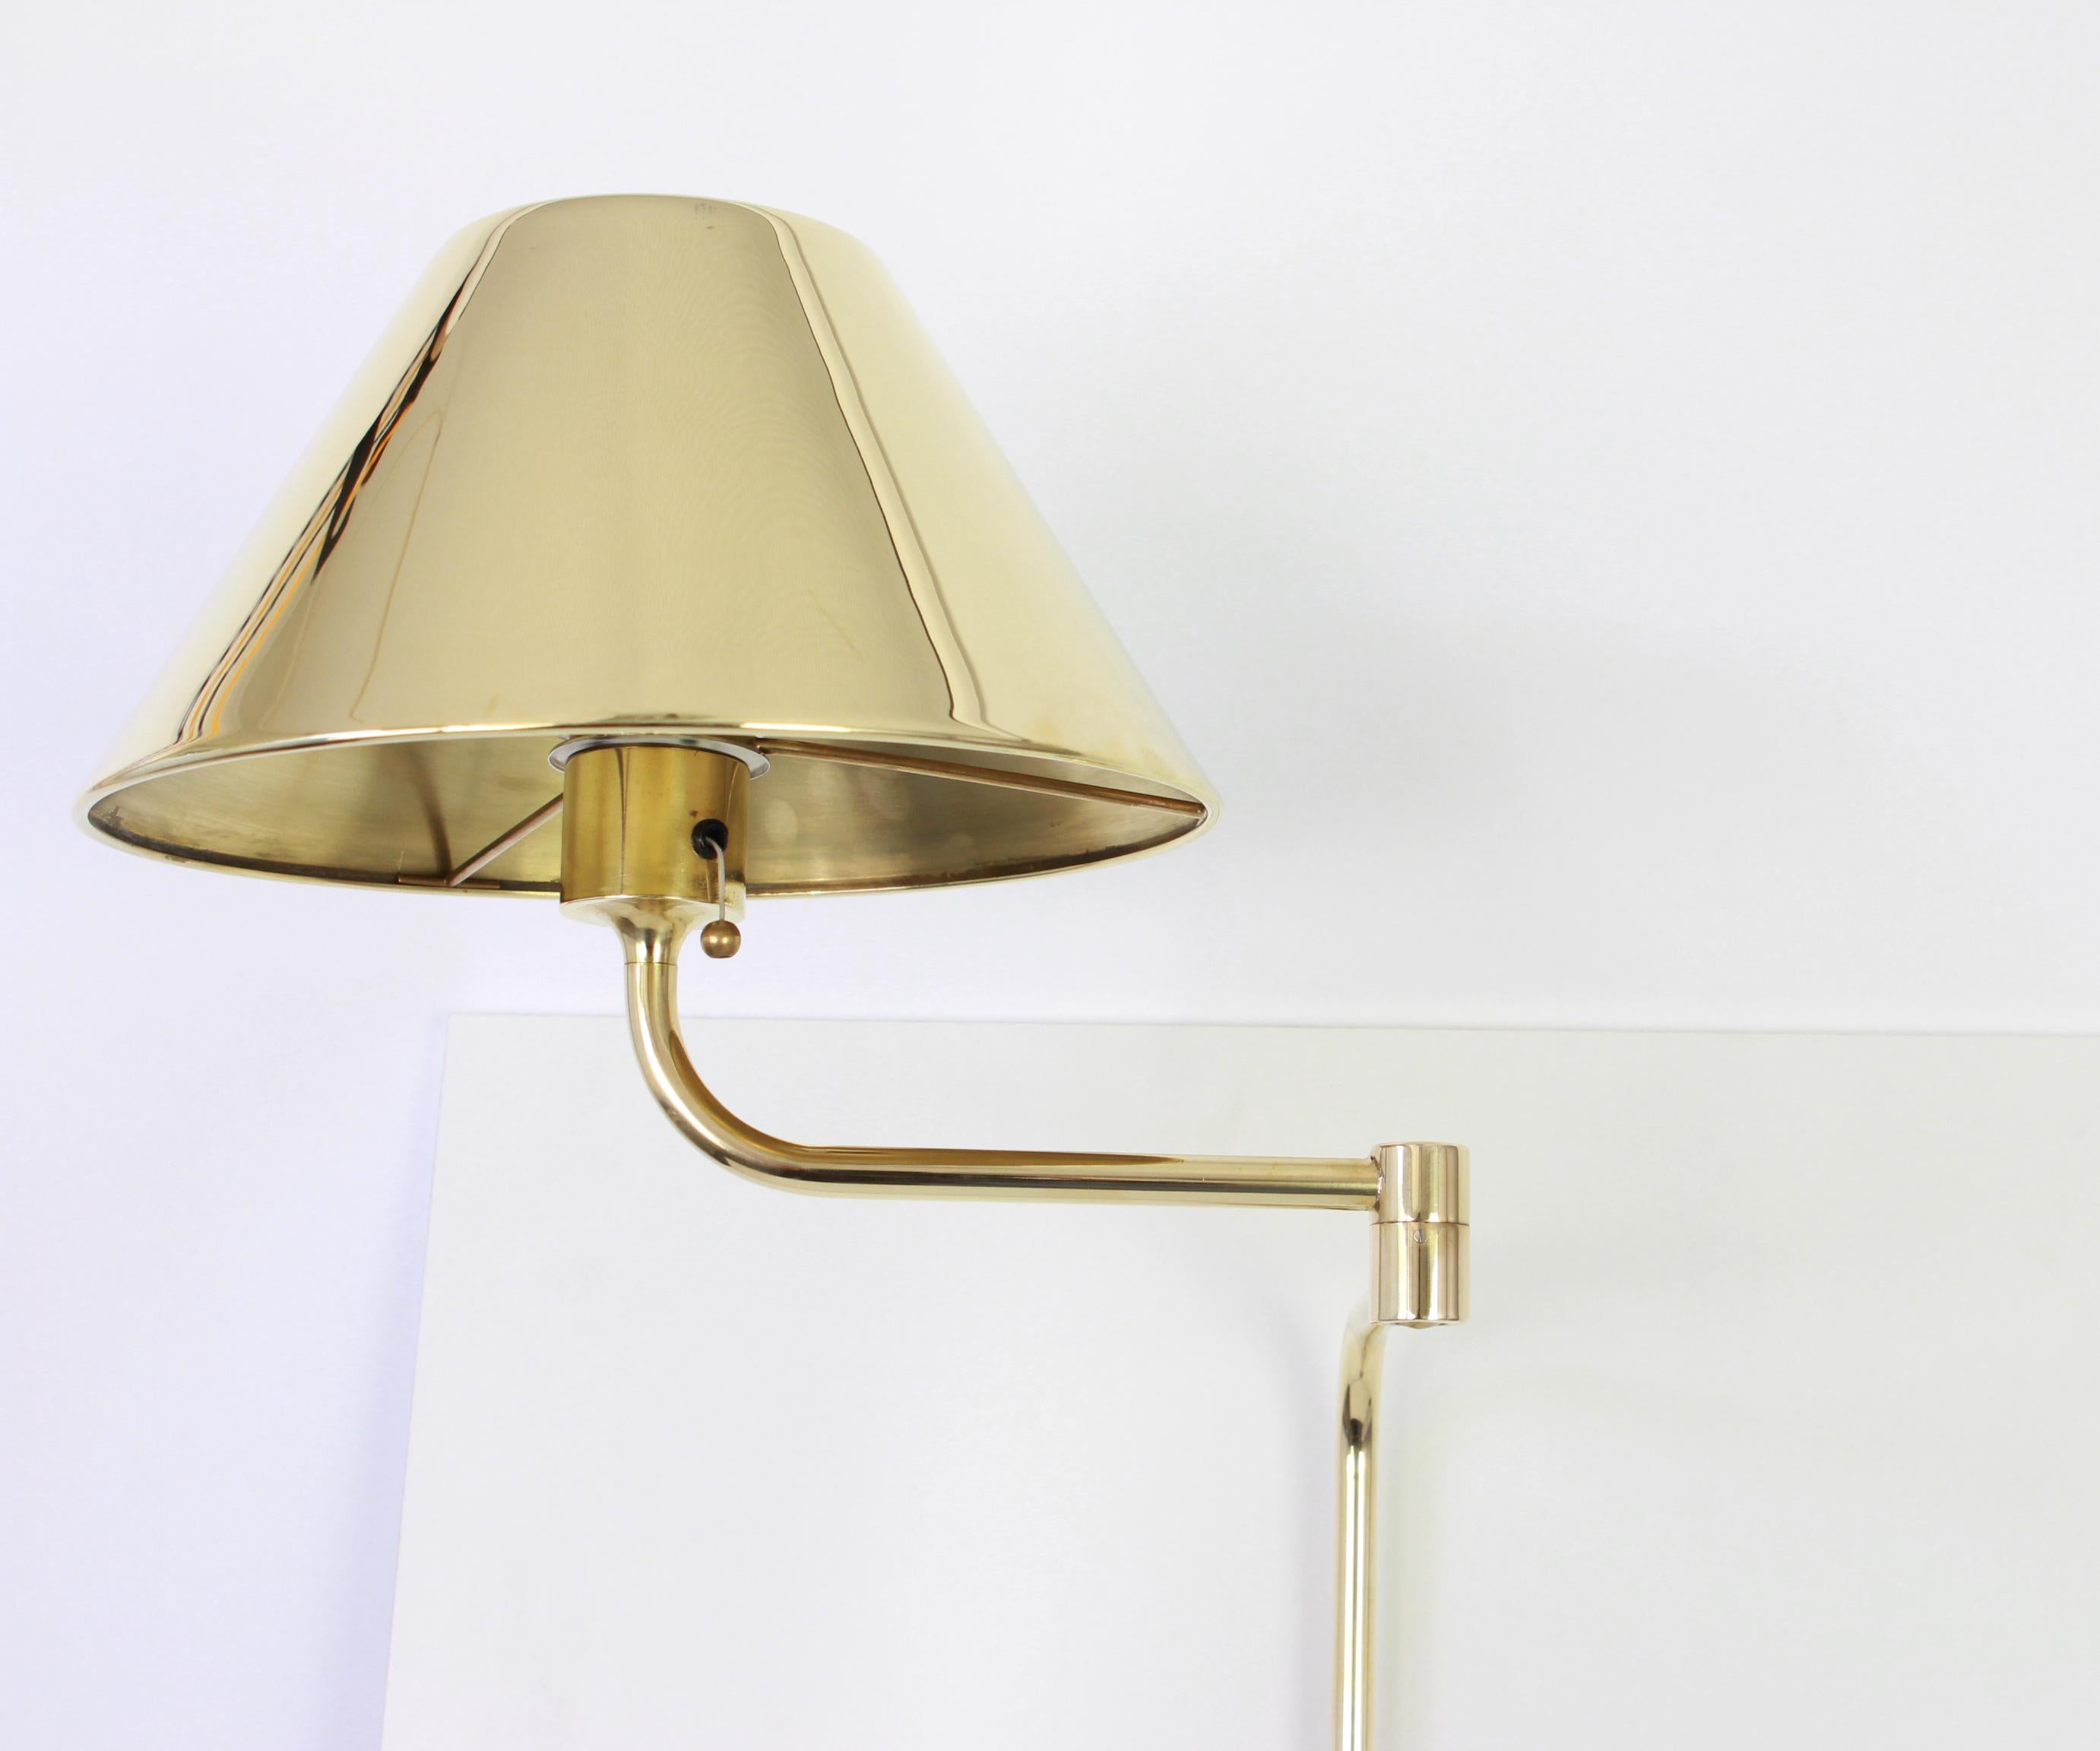 Midcentury designer brass wall sconces by Florian Schulz, 1980s
The wall light needs 1 x E27 standard bulb.


Dimensions:

Height approximate 85 cm, 33.4 inches, the height is adjustable.(Picture Nr.3)
Width 54 cm, 21.2 inches

Good